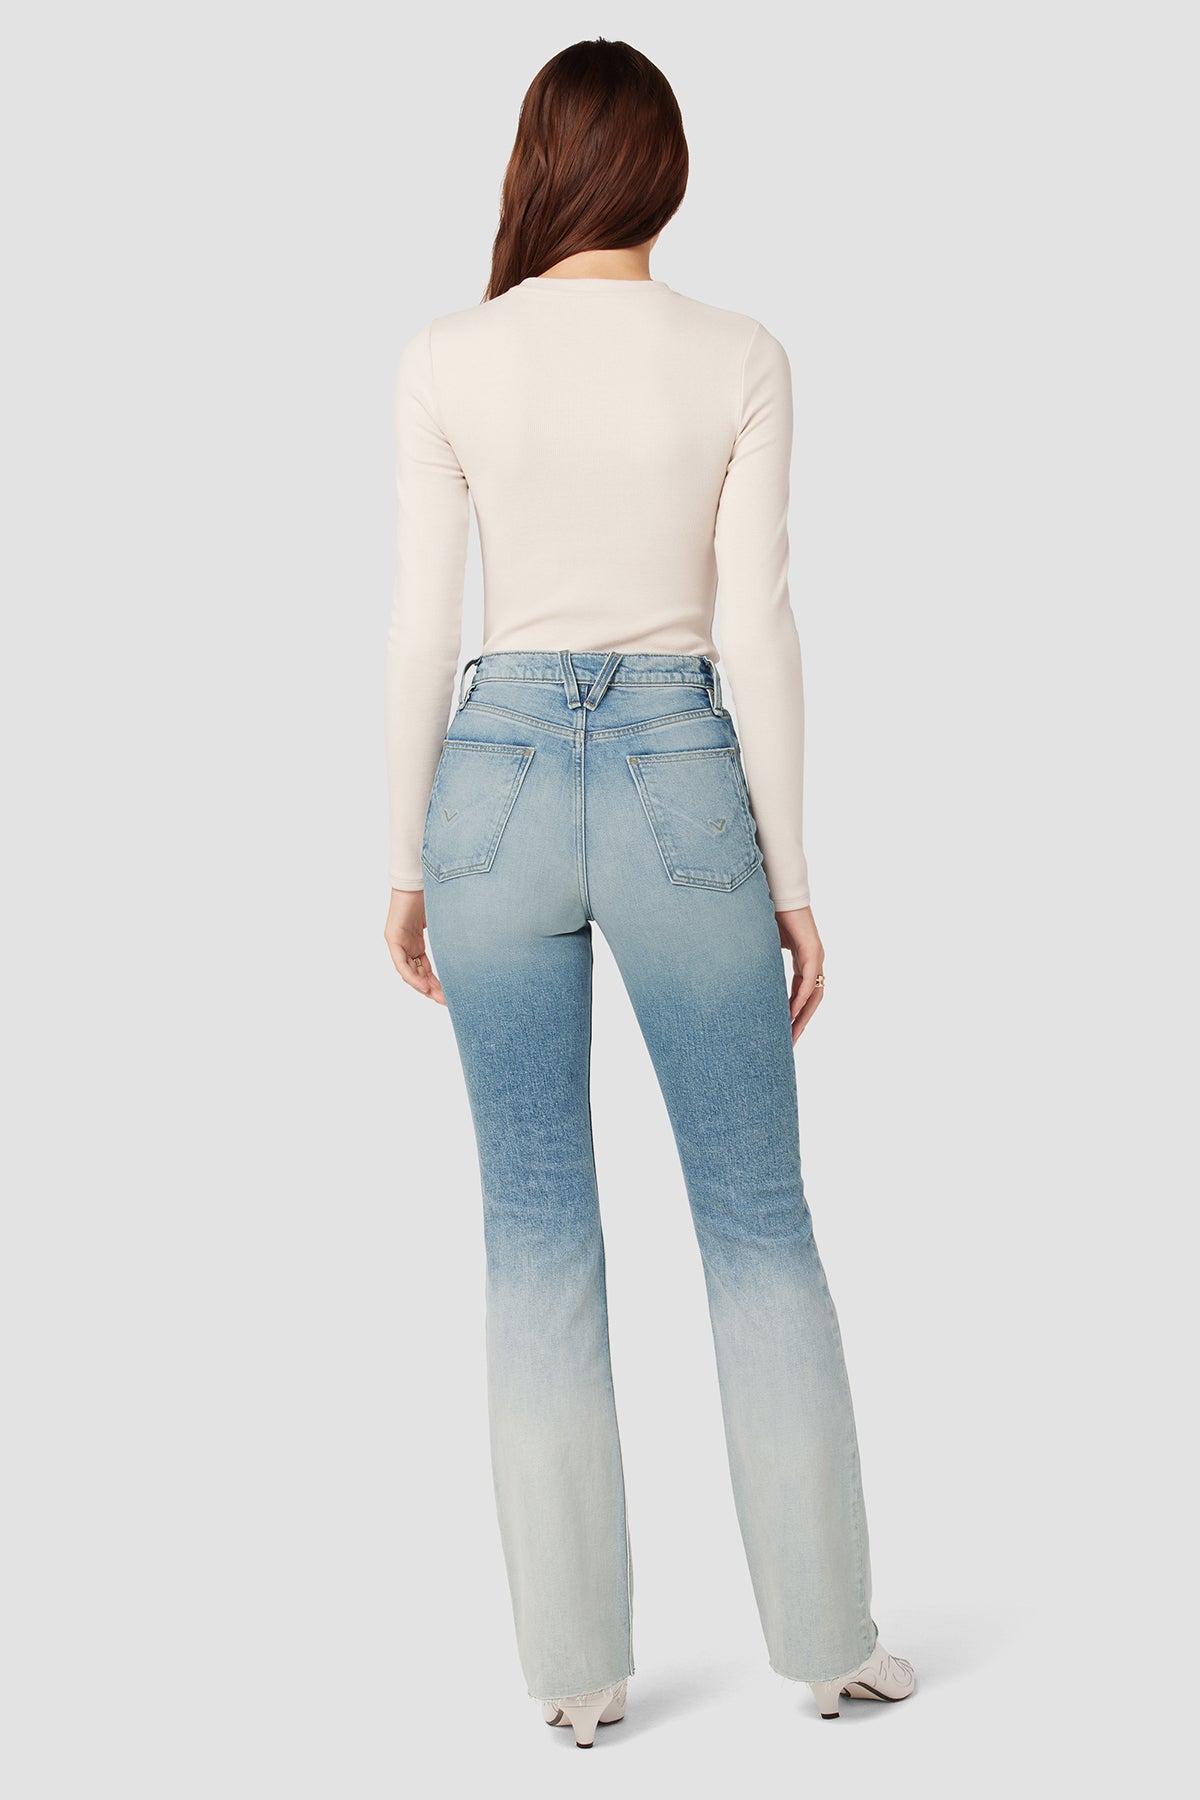 Petite Light Blue Wash Dip Front Low Rise Flared Jeans